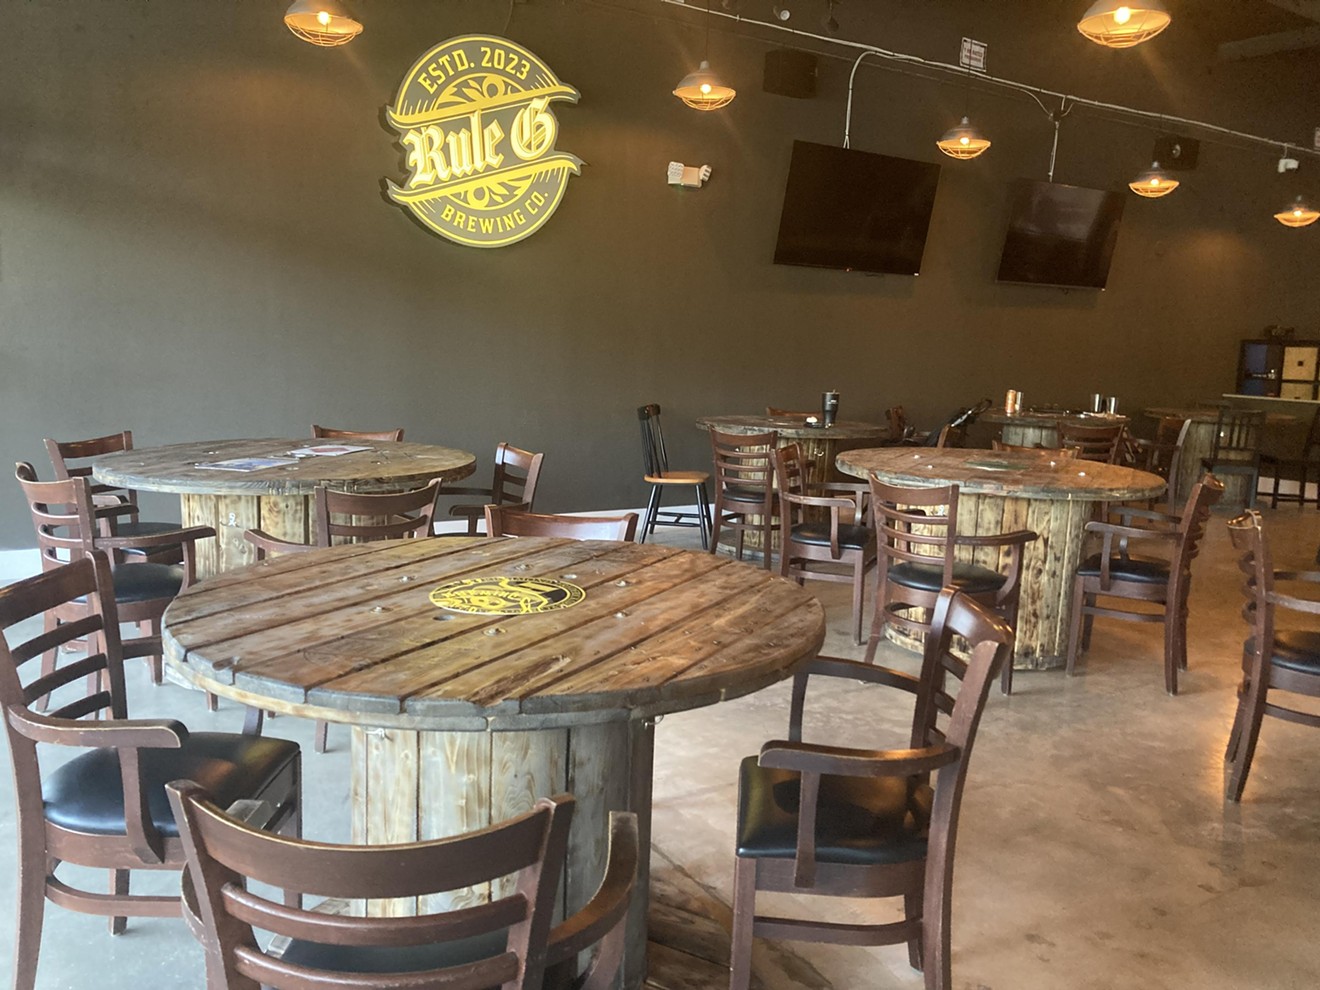 Ralph Rapa, who's been in the railroad industry for near two decades, has opened Rule G Brewery in Coconut Creek.